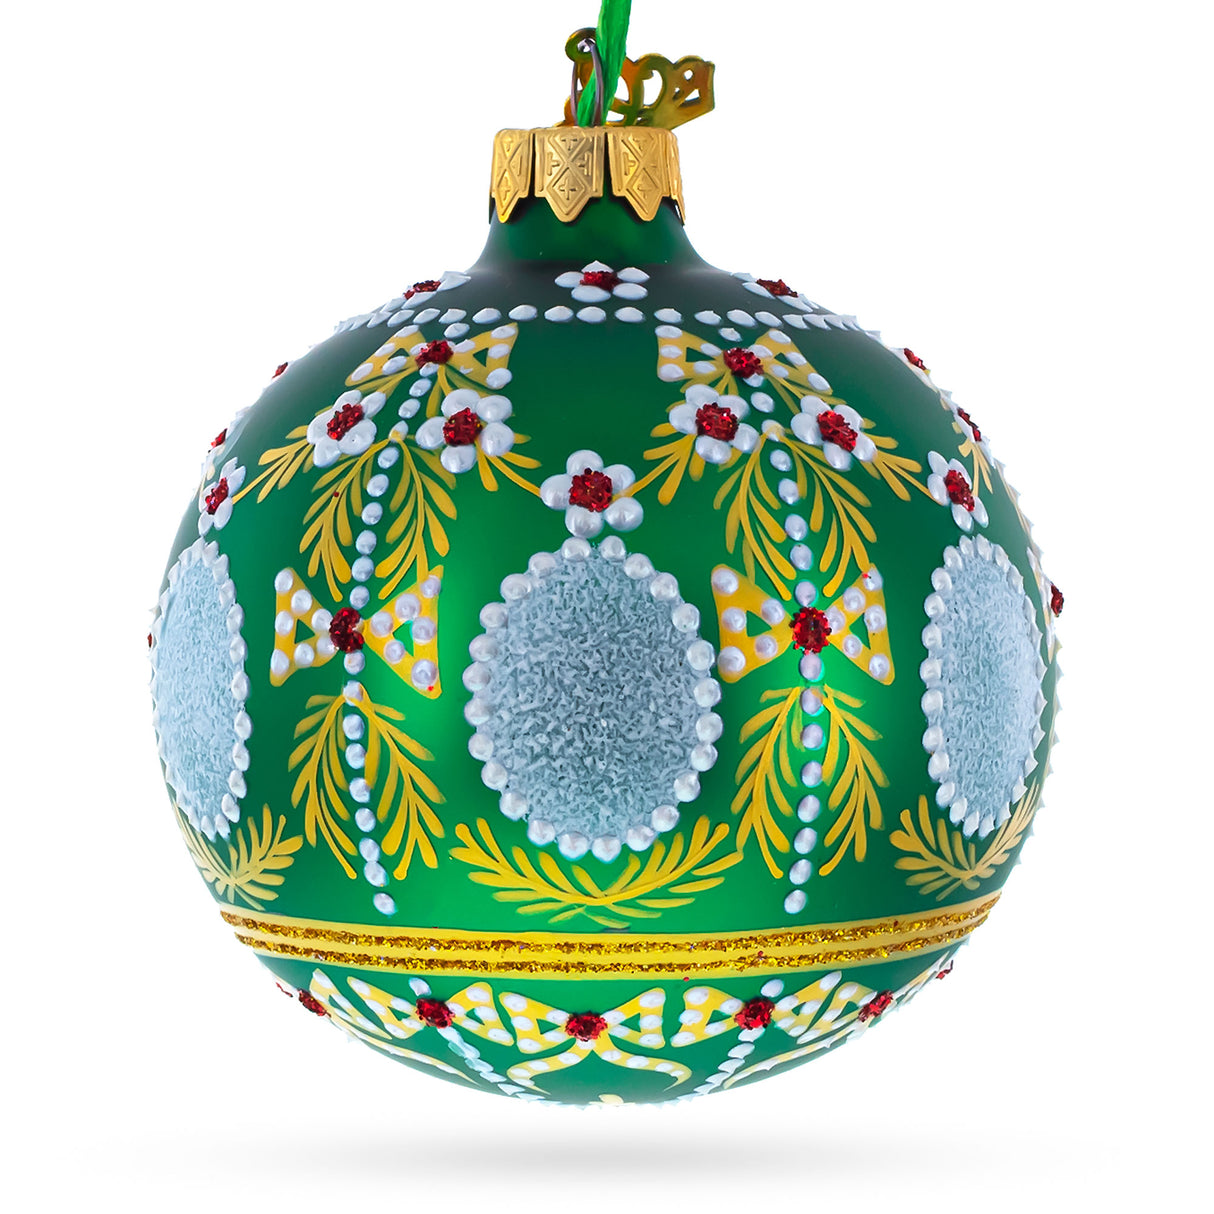 Glass Enchanting 1908 Alexander Palace Royal Egg Green - Blown Glass Ball Christmas Ornament 3.25 Inches in Green color Round